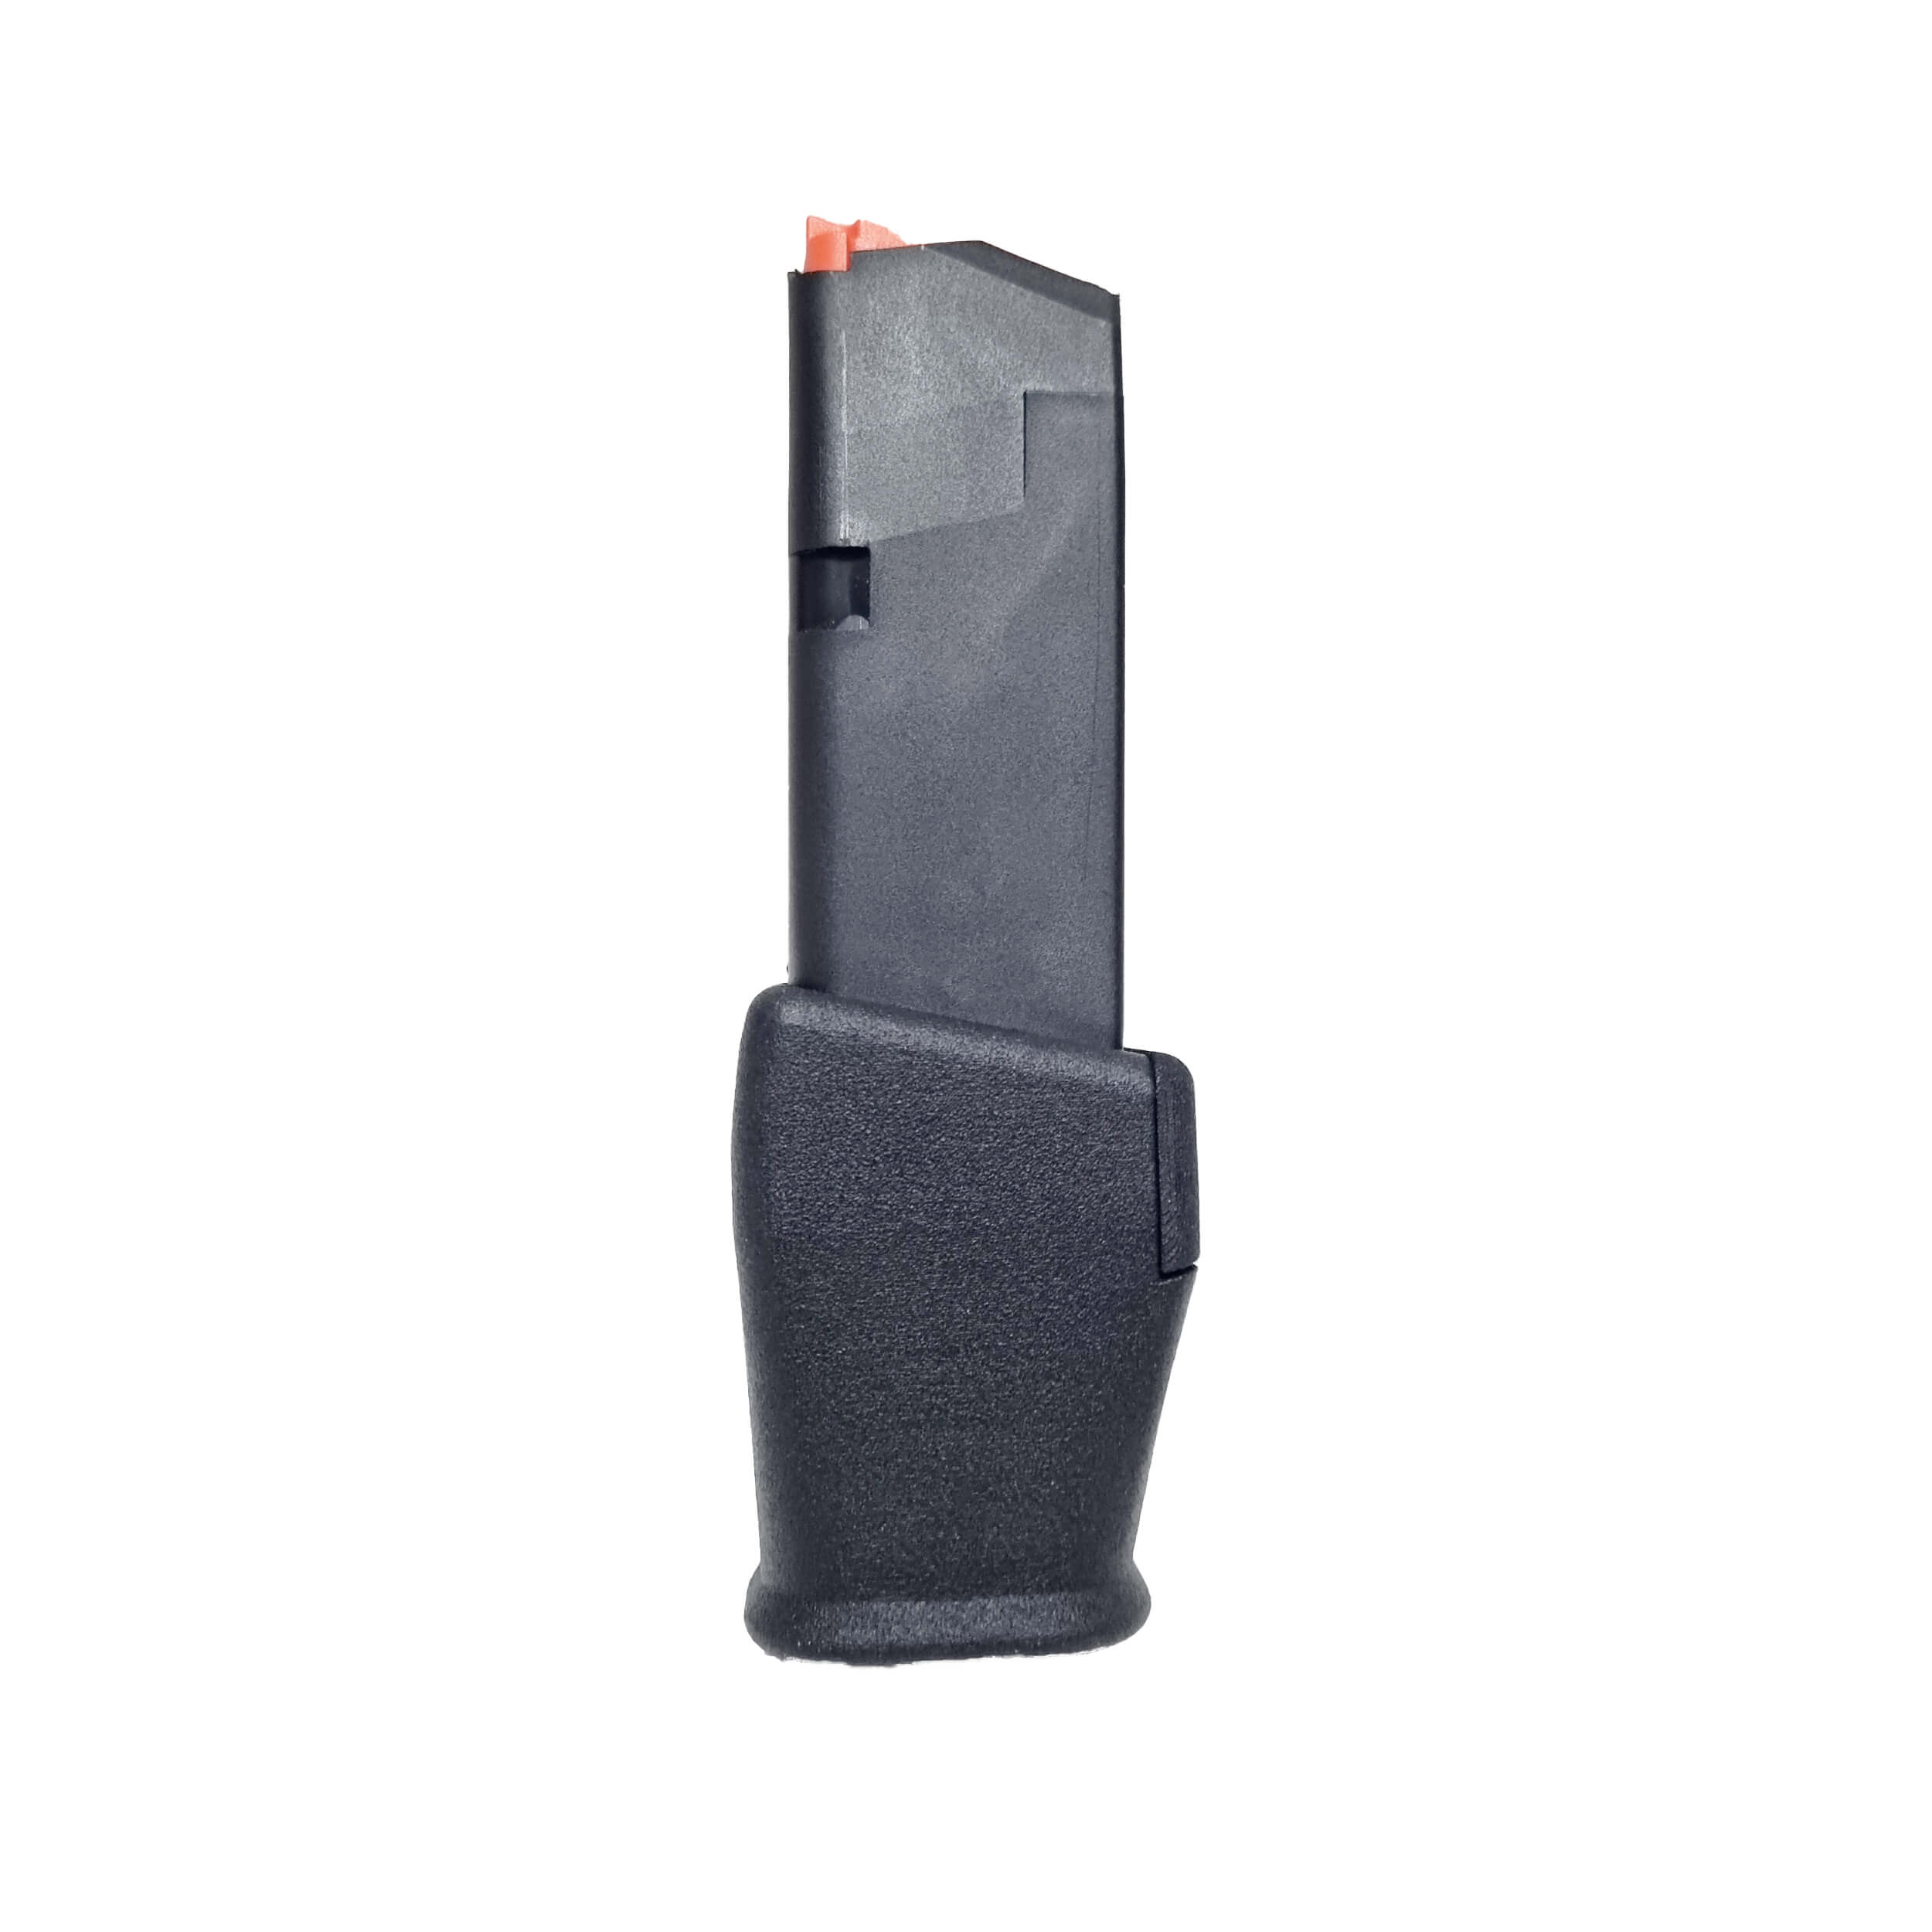  ISSProtectiontrade Magazine  Glock Kit for Schmeisser AR-15-9mm Rifles (10 Rounds)